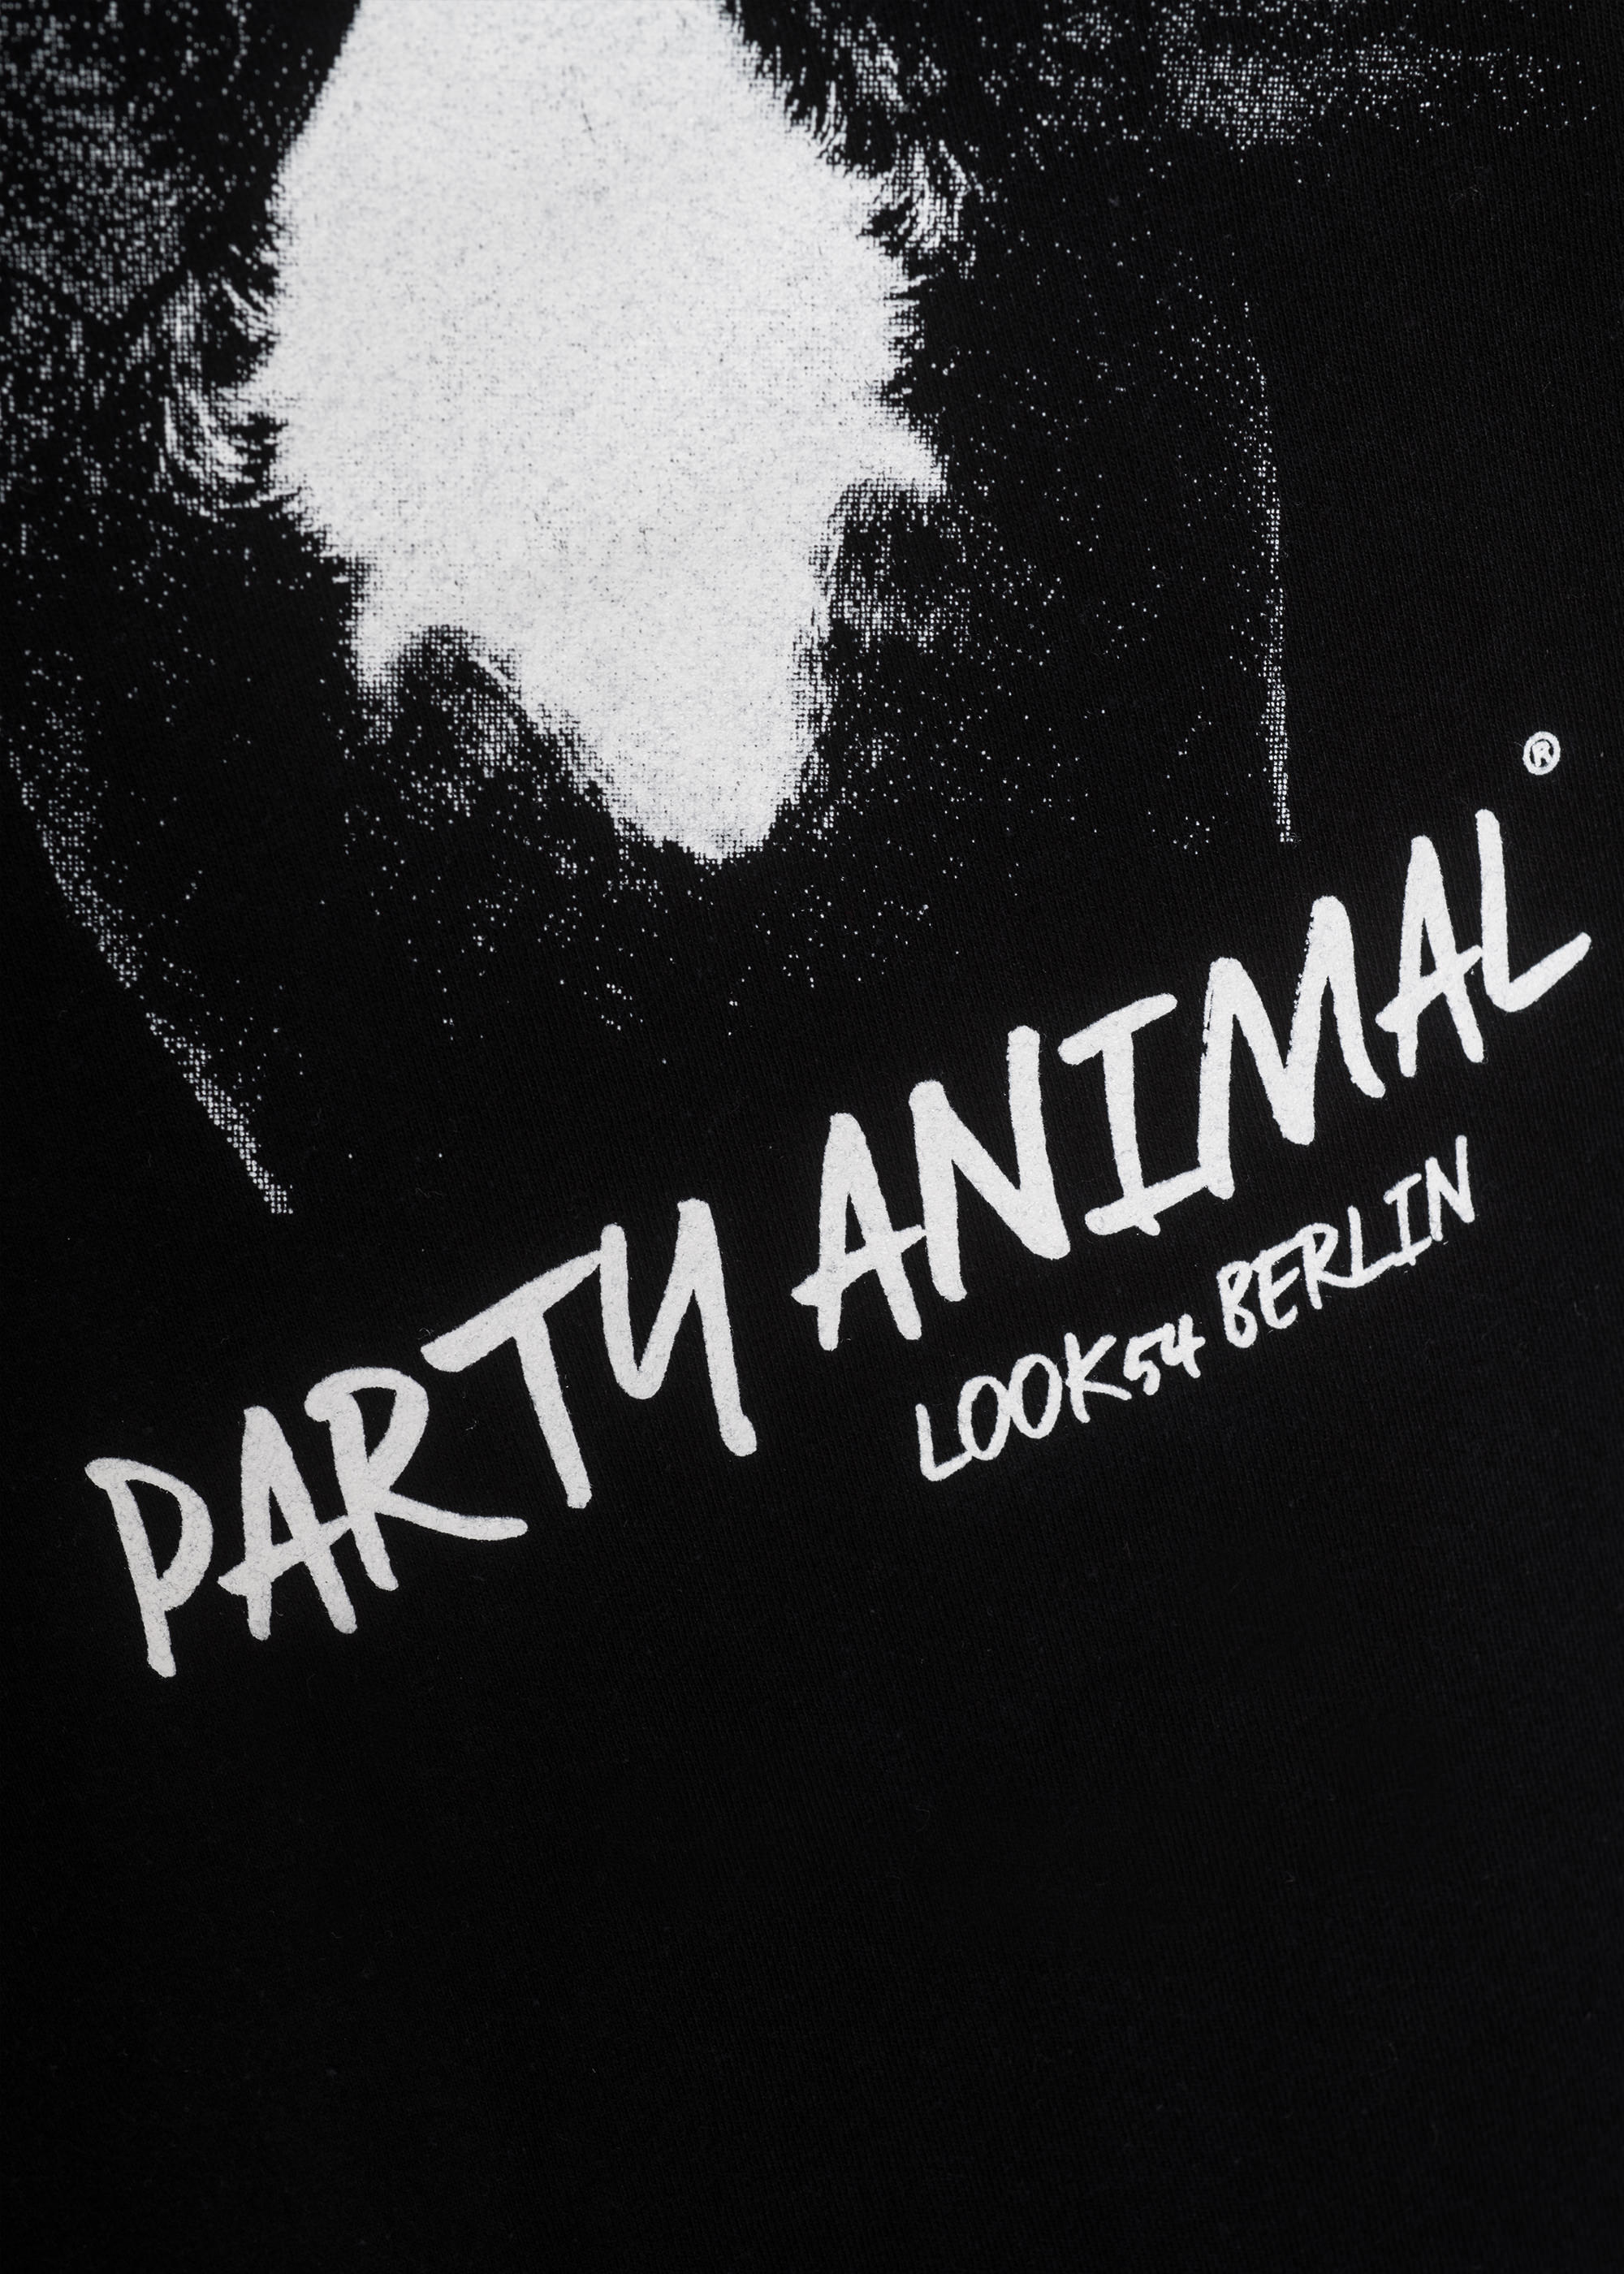 Party Animal - Victory - T-Shirt